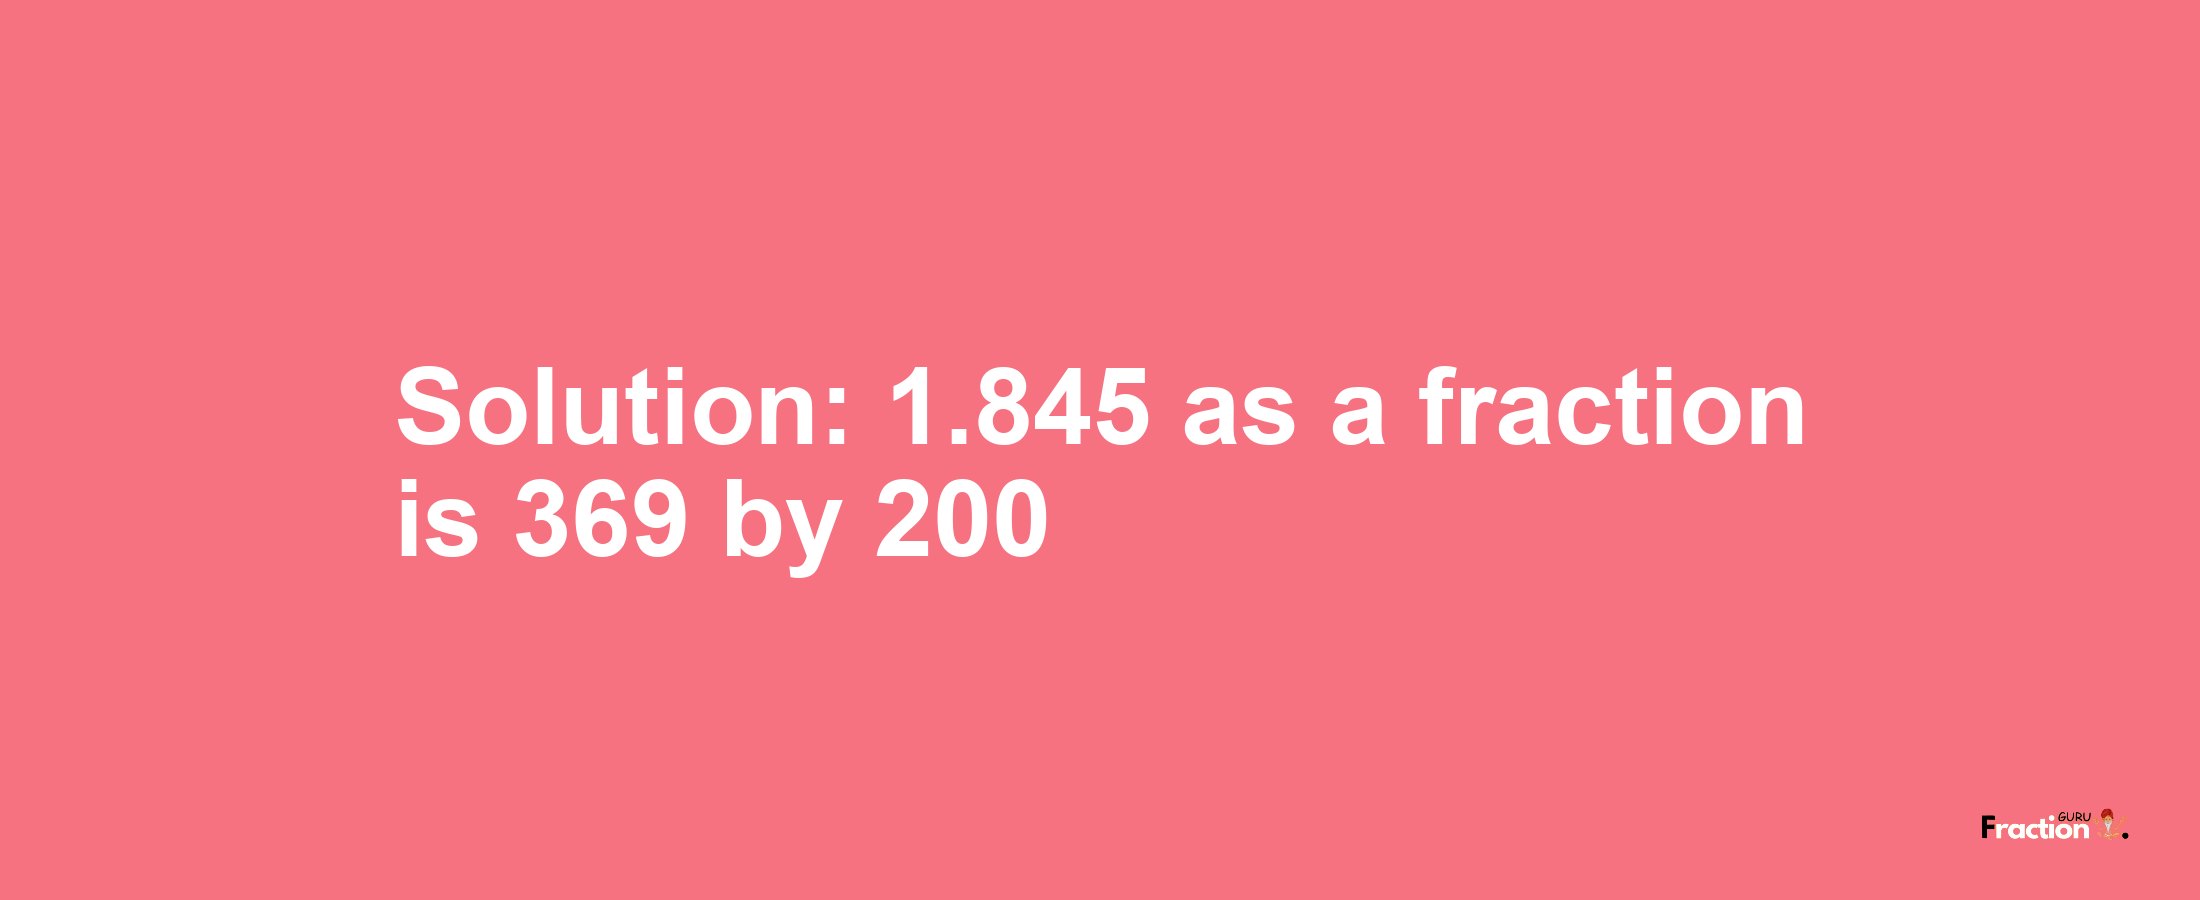 Solution:1.845 as a fraction is 369/200